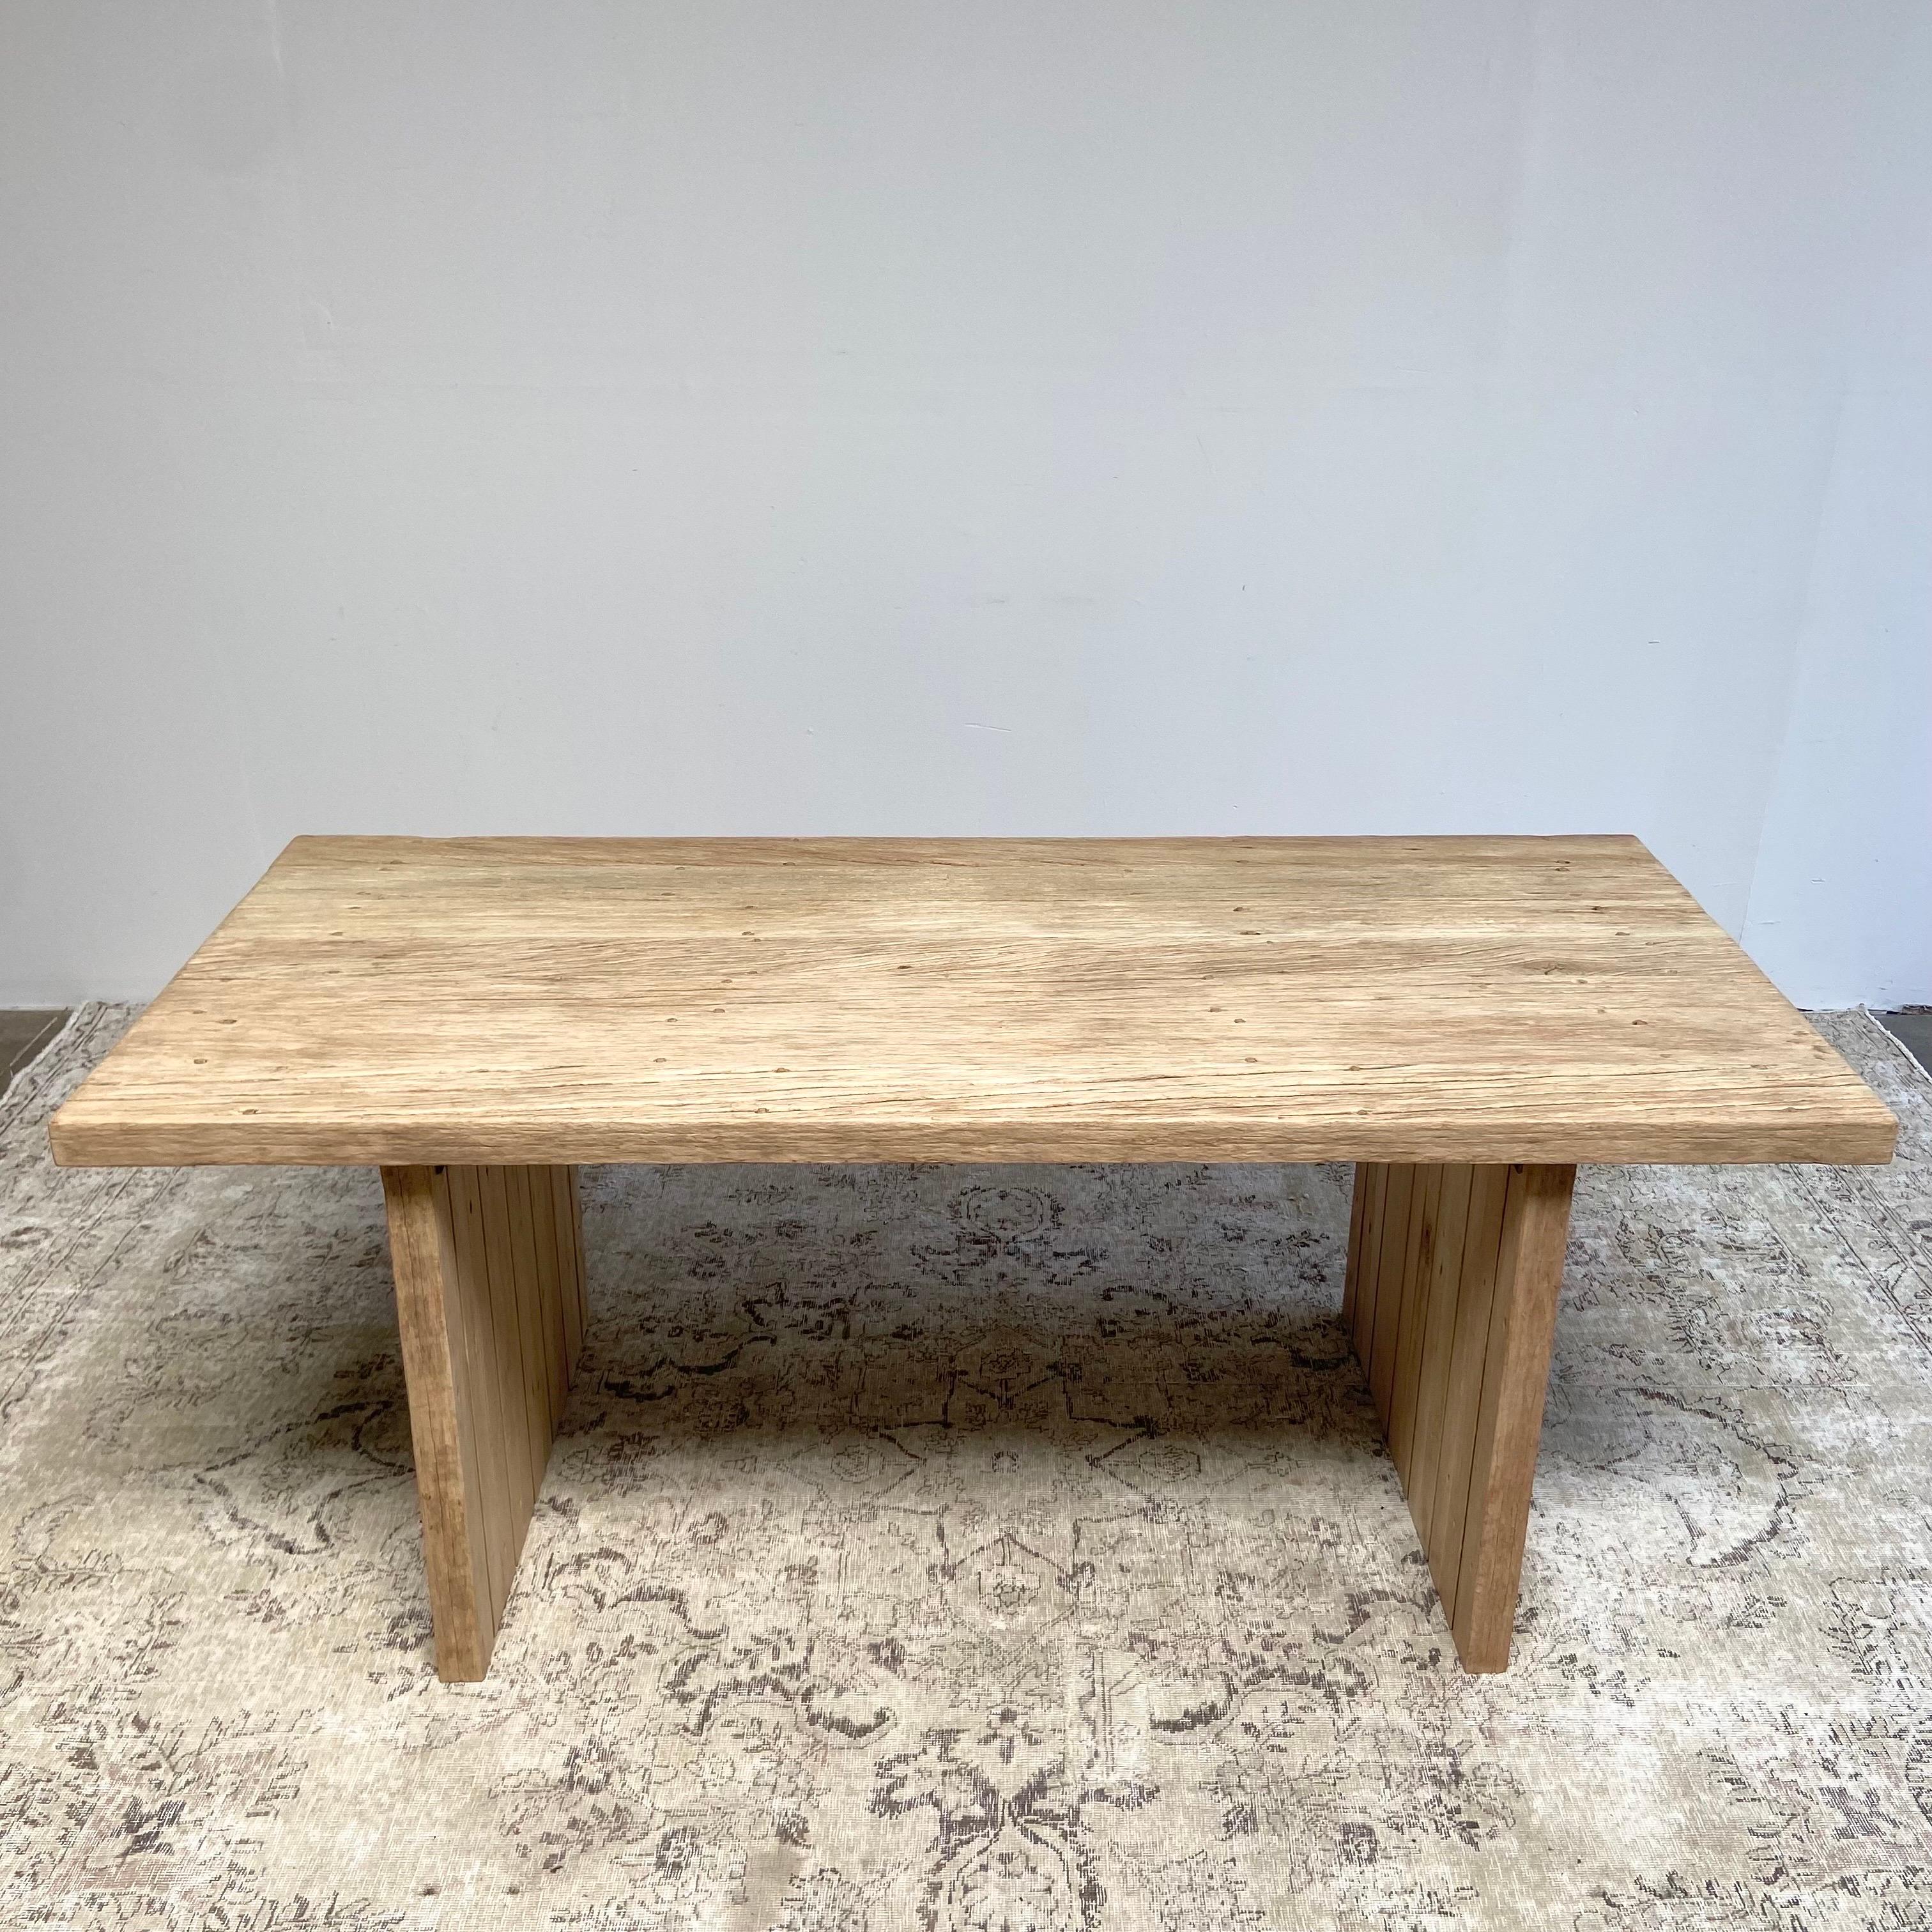 Custom made elm wood dining table made from reclaimed timbers.
We were only able to get enough select antique wood to create this beautiful table and a few others.
This table size: 72”w x 32”d x 30”h
Has a clear matte/satin finish to protect the